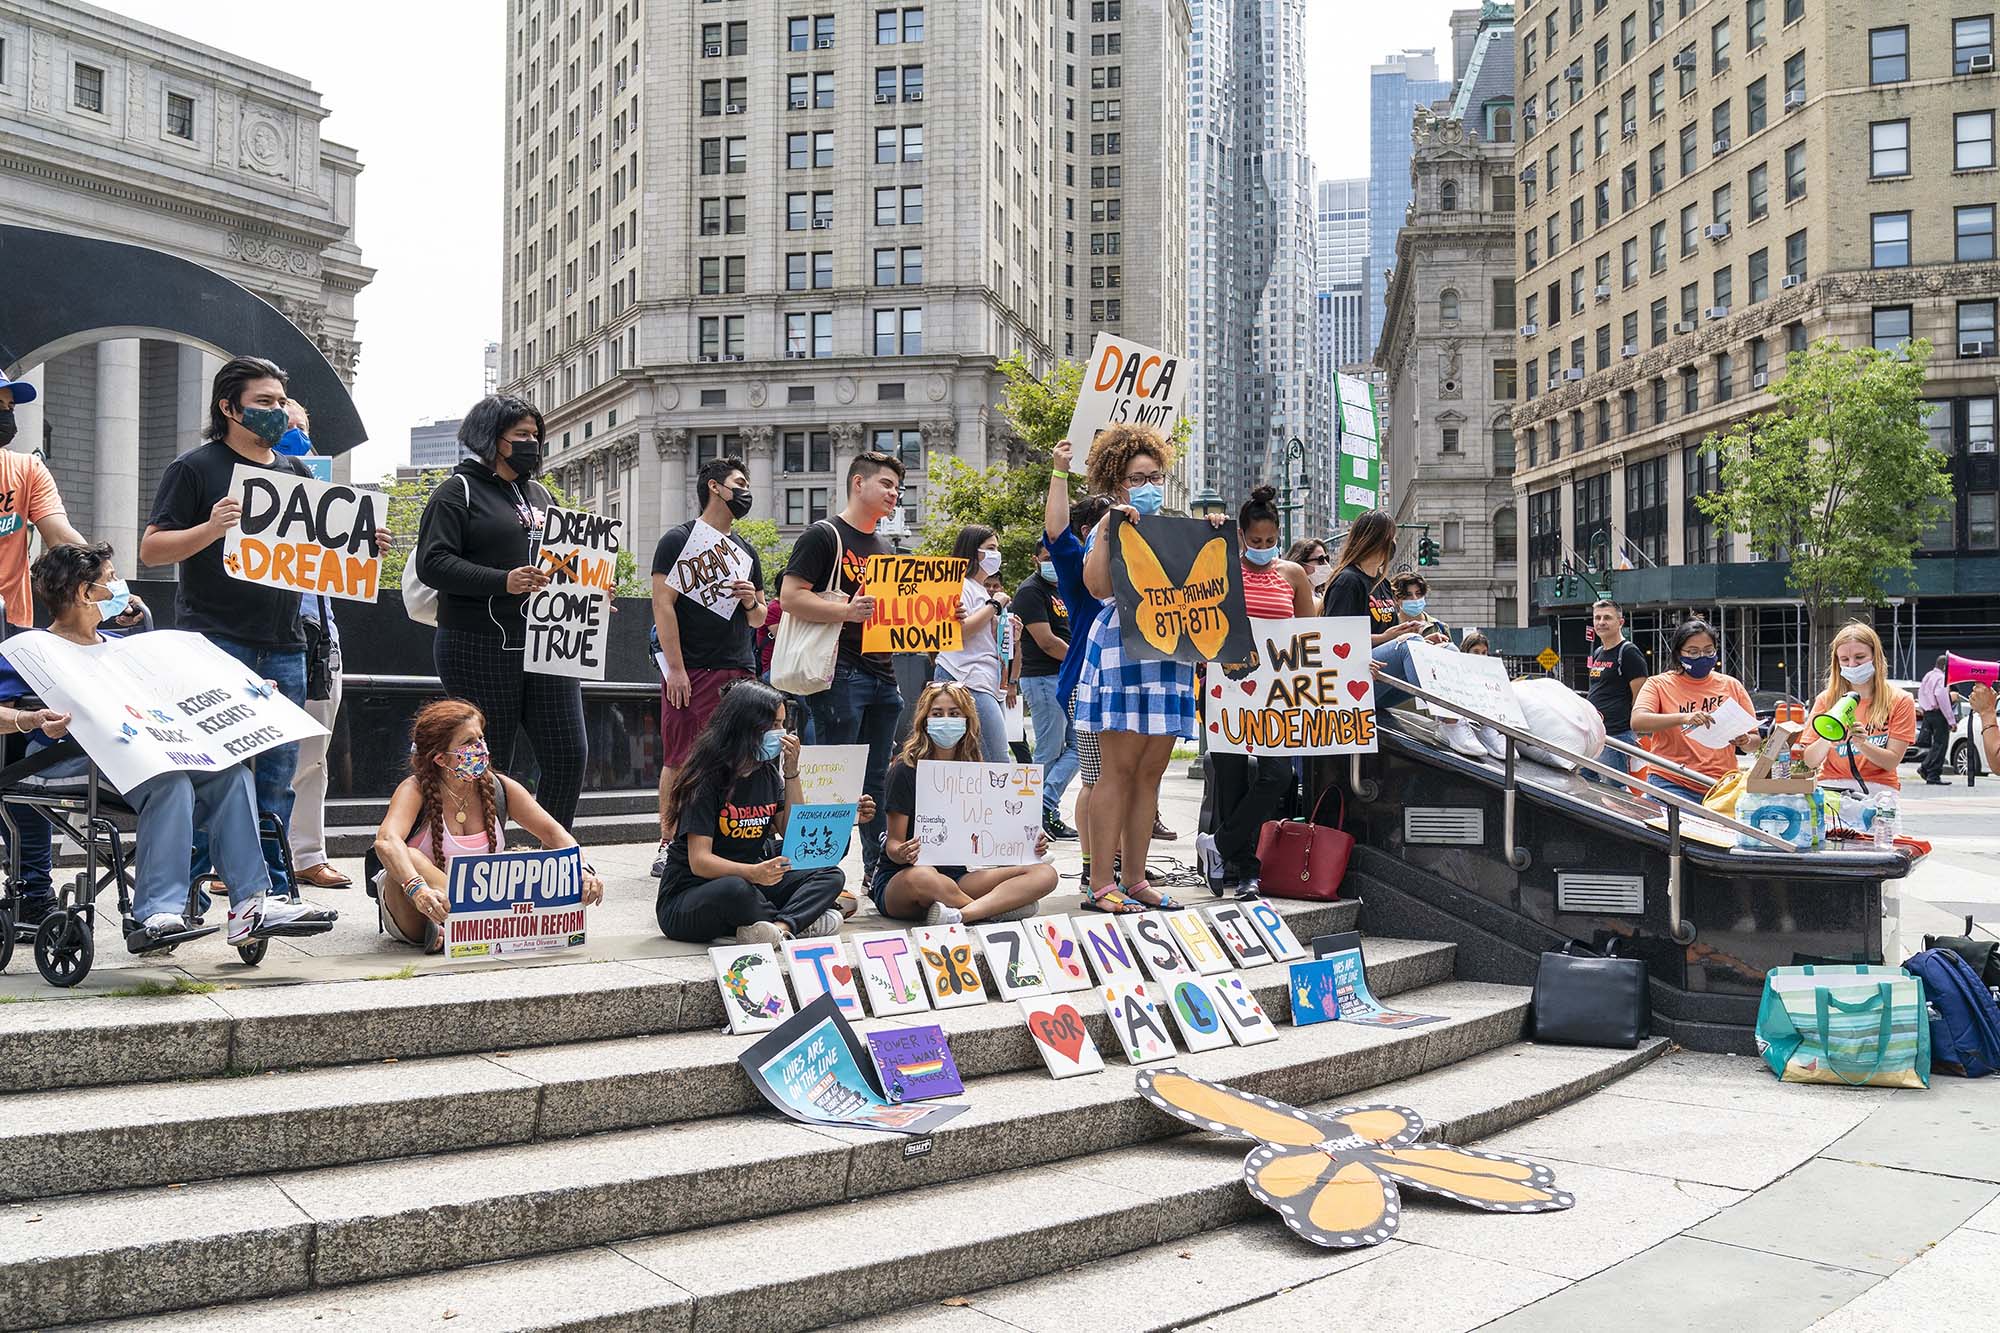 PHOTO: Deferred Action for Childhood Arrivals (DACA) protesters rally on Foley Square demanding citizenship now for all undocumented immigrants in New York, Aug. 17, 2021.